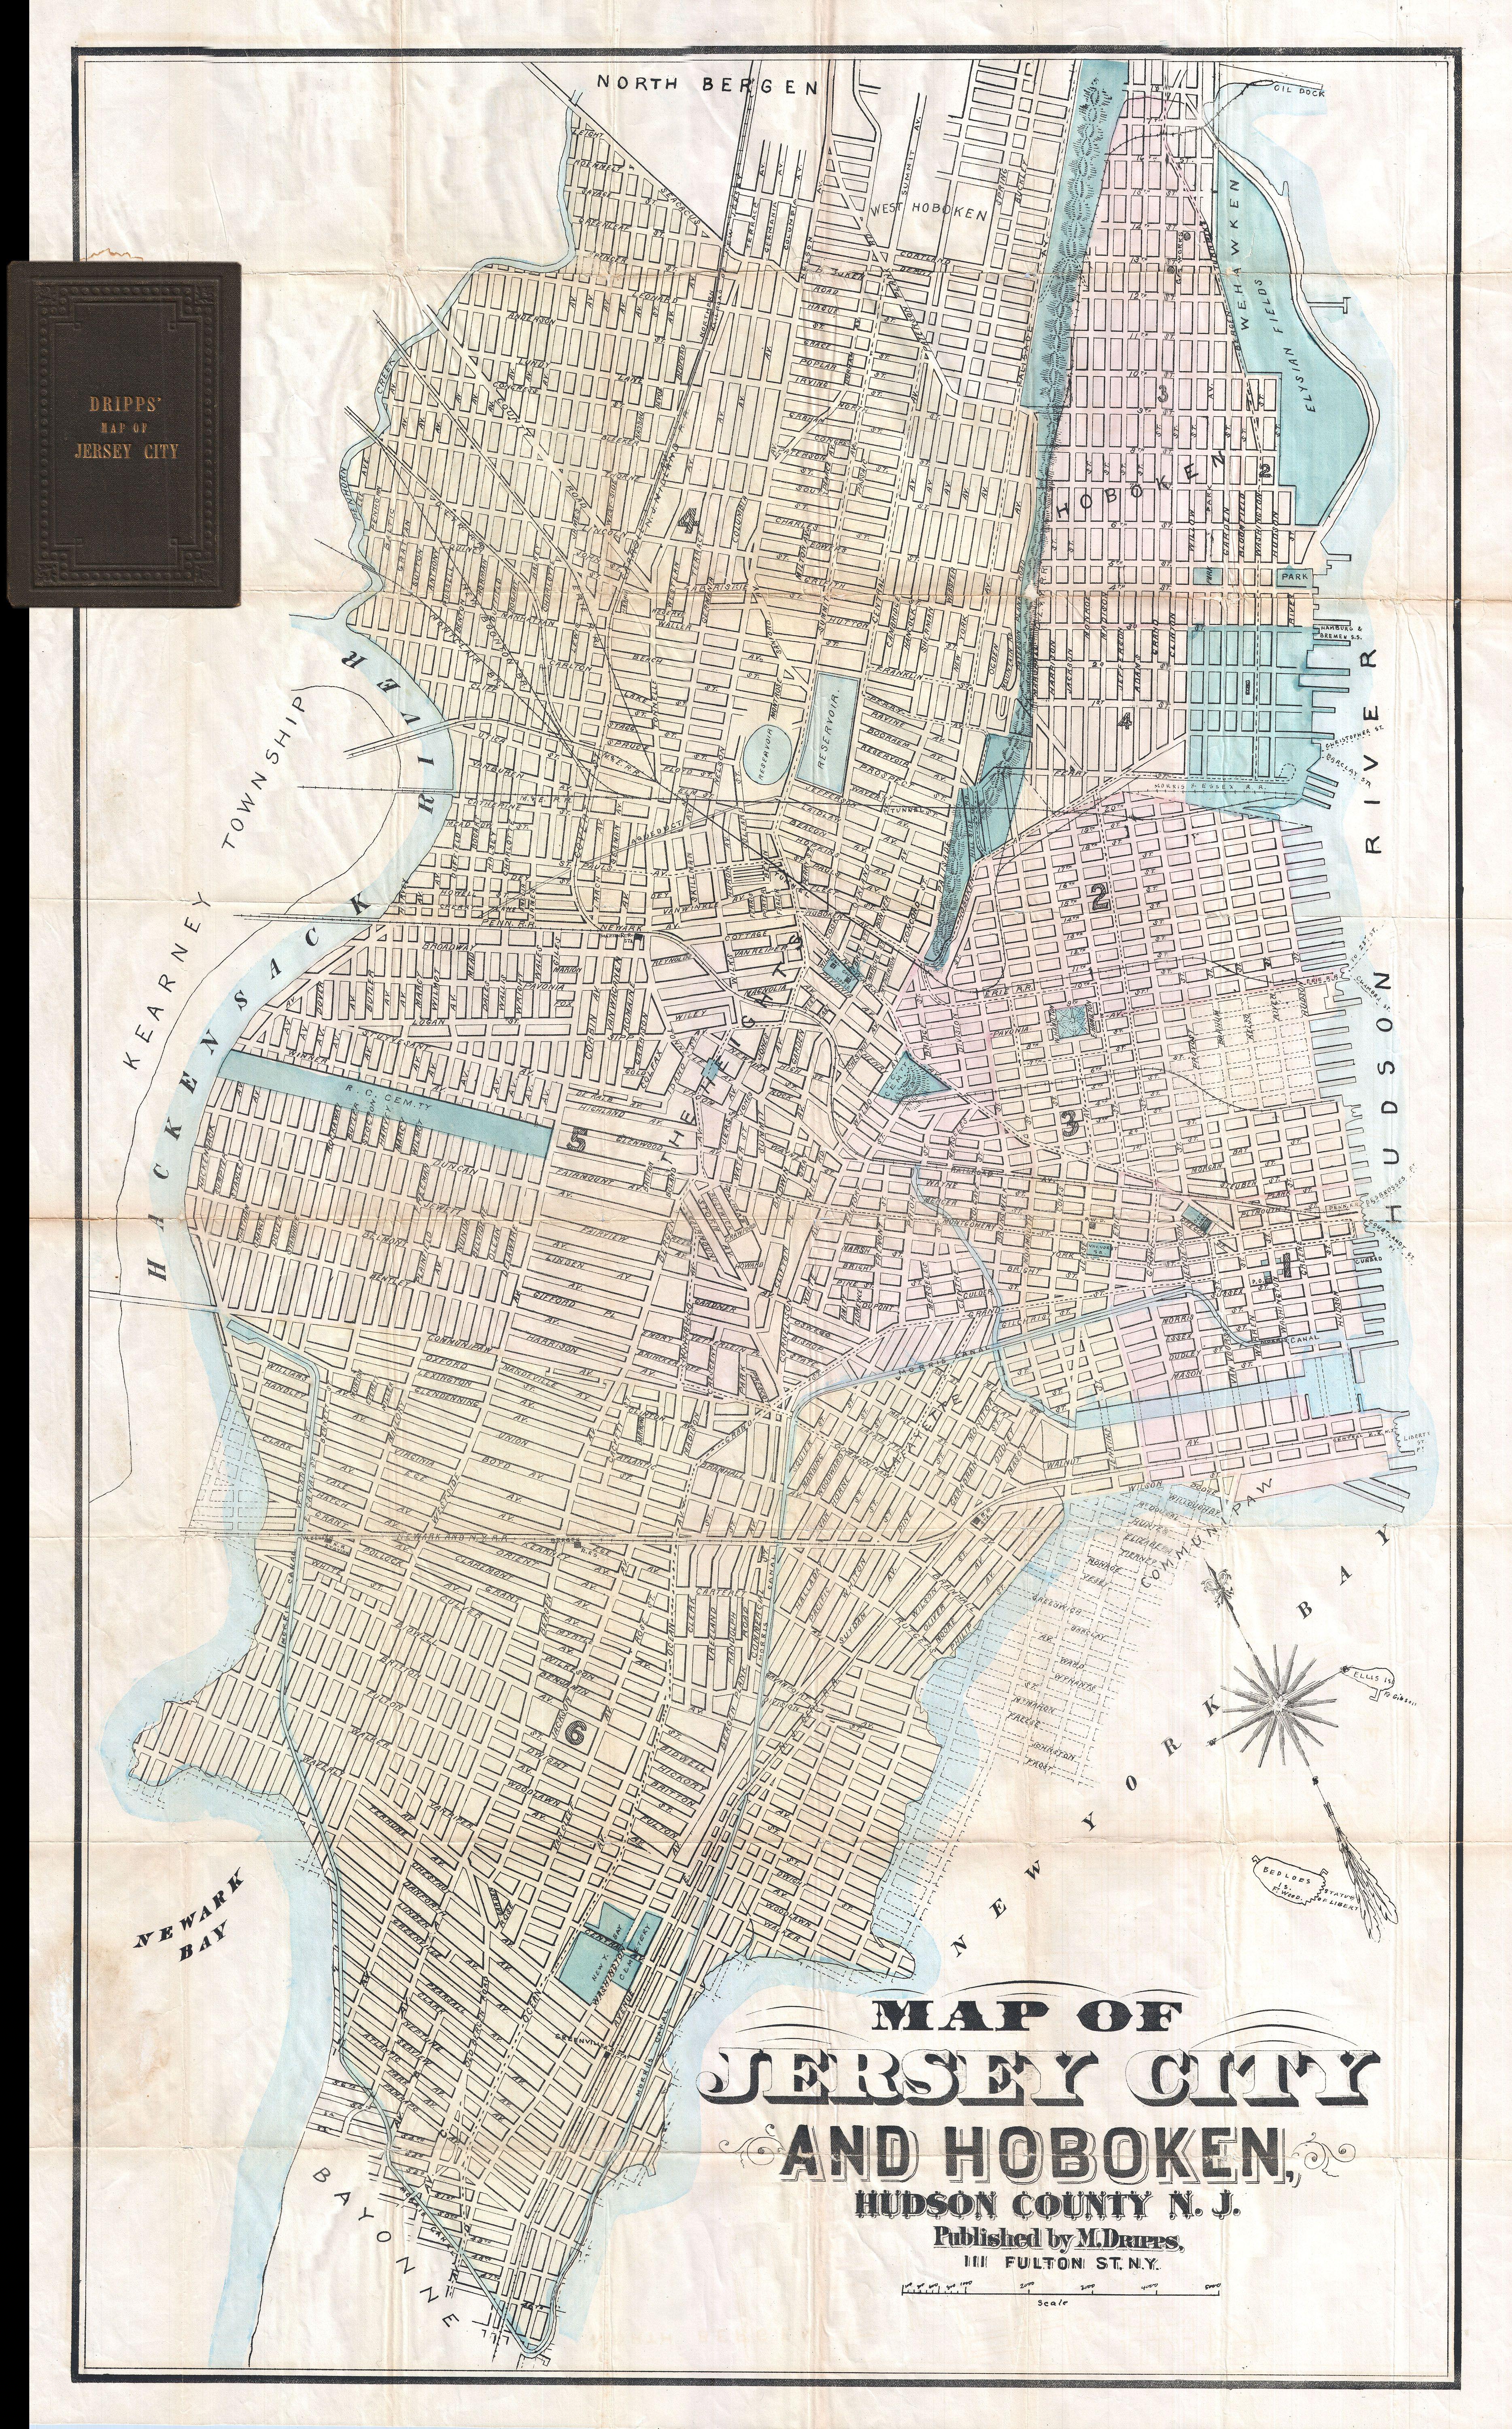 Jersey City Street Cleaning Map File:1886 Dripps Map of Hoboken and Jersey City, New Jersey 